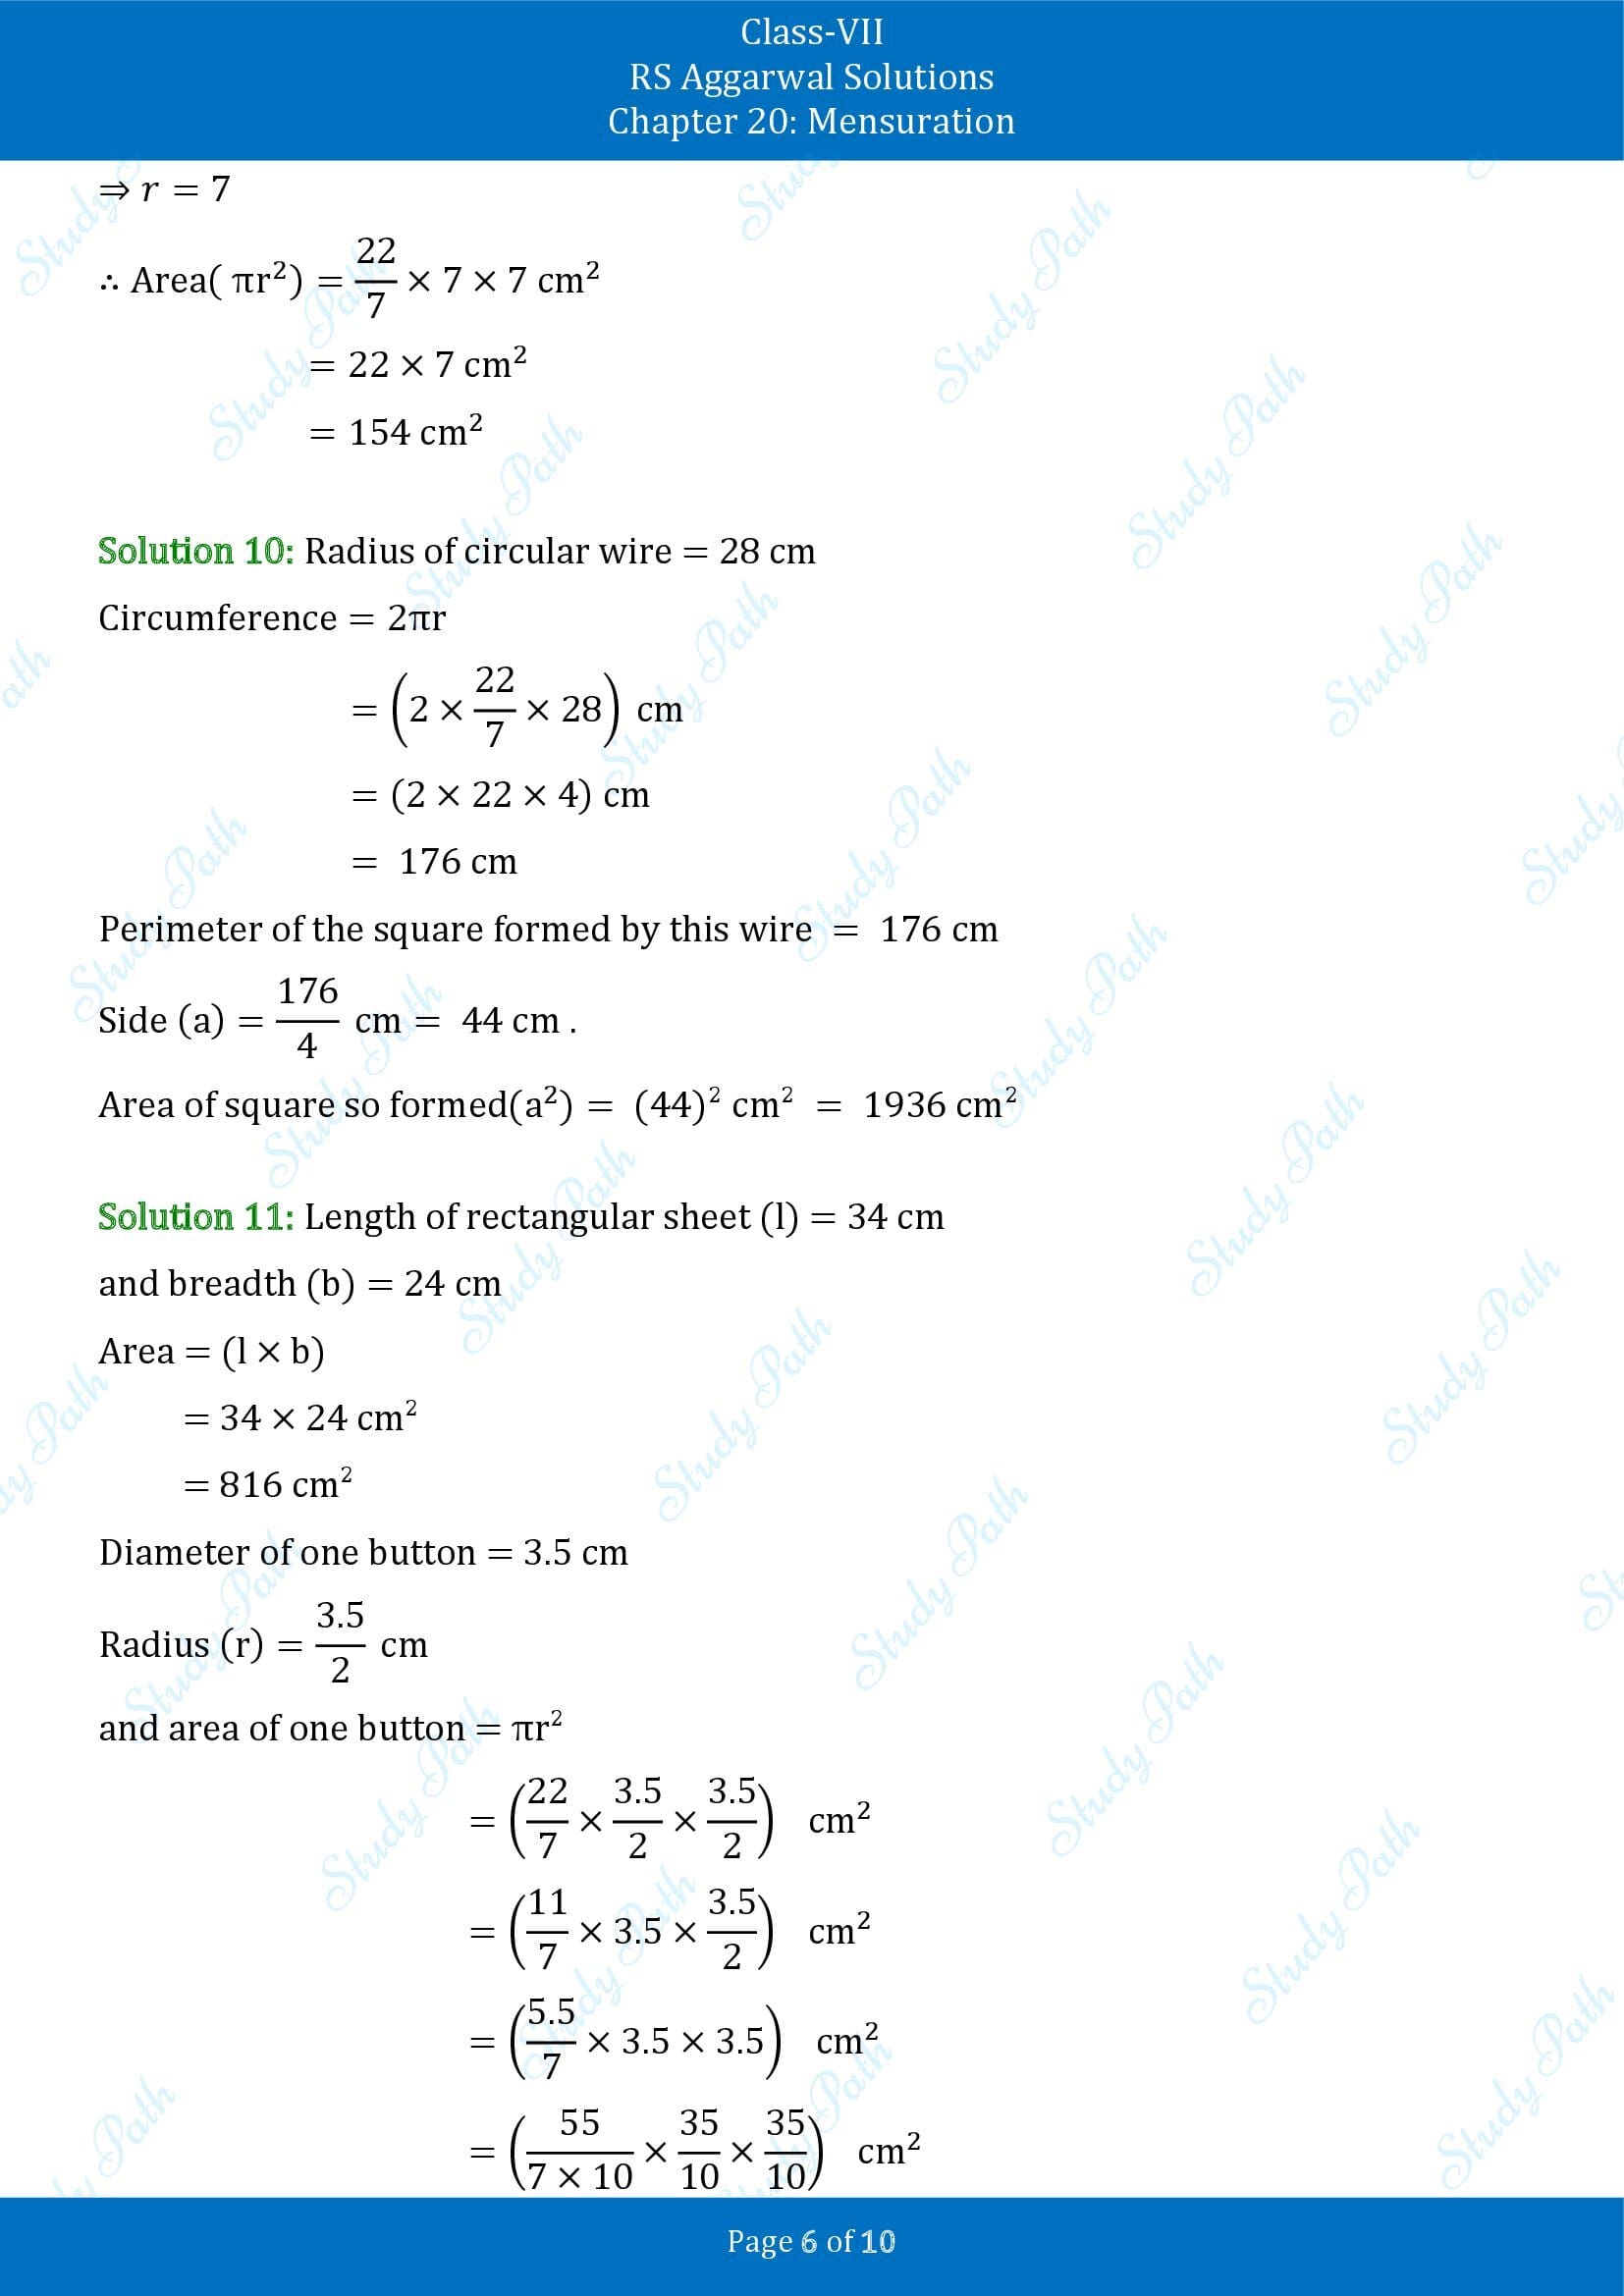 RS Aggarwal Solutions Class 7 Chapter 20 Mensuration Exercise 20F 00006